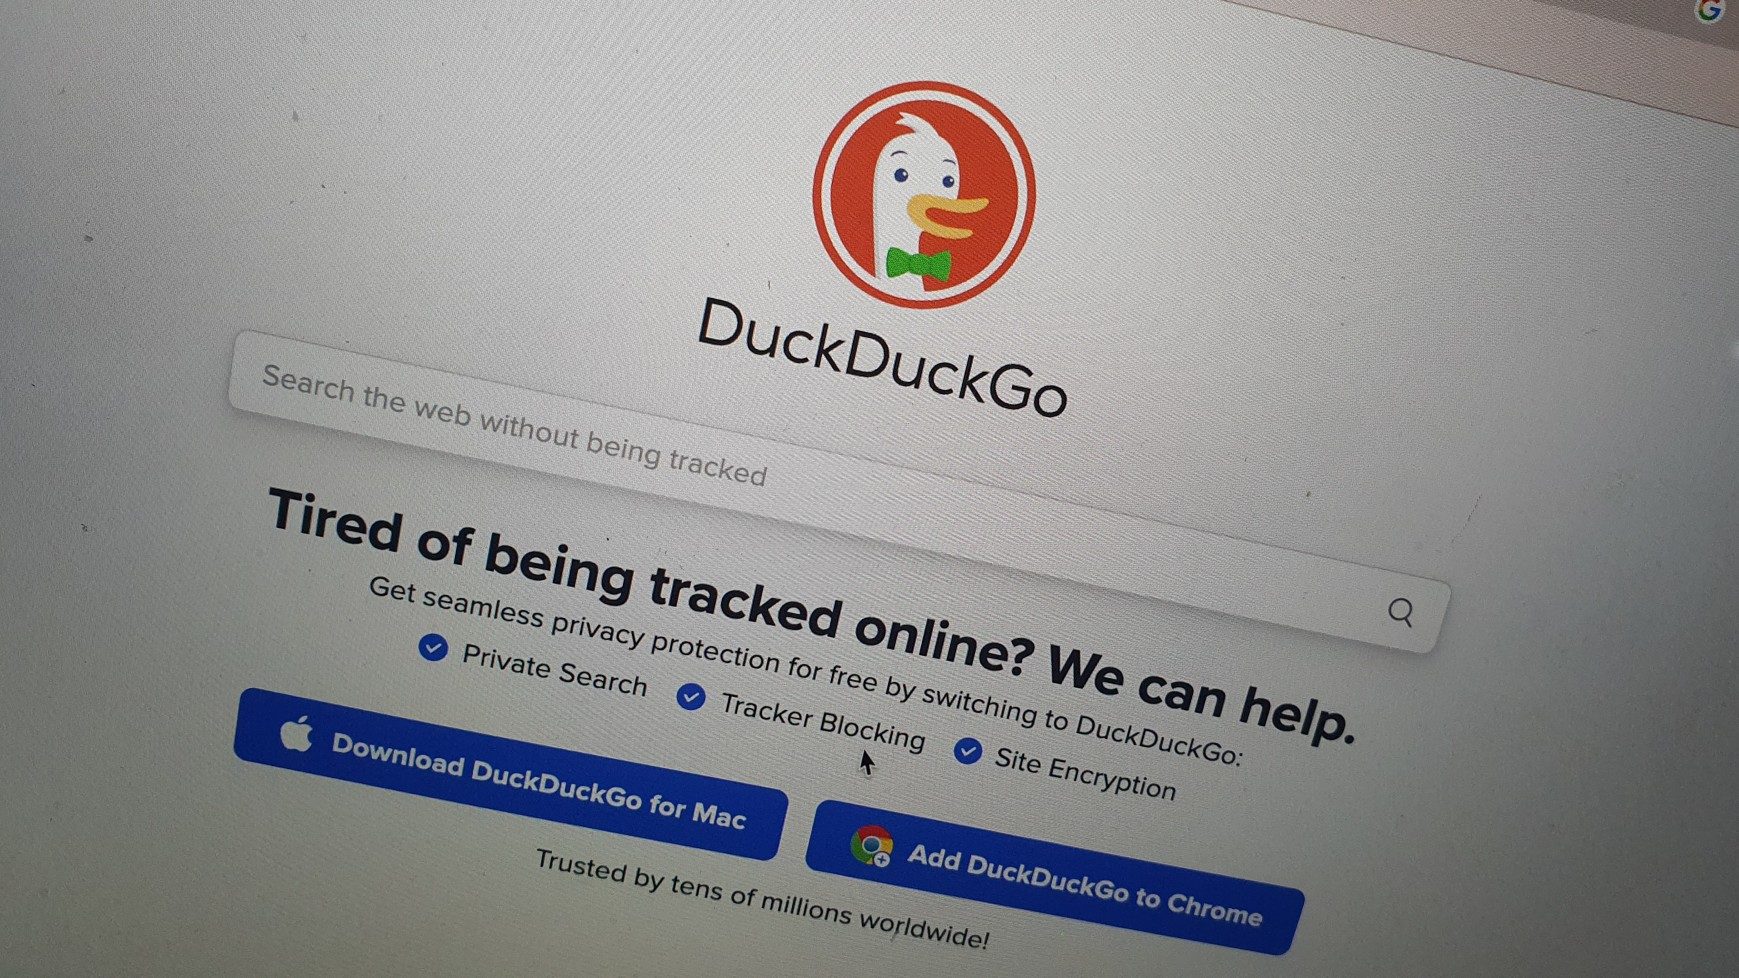 DuckDuckGo says market share constrained by rival Google’s huge wallet